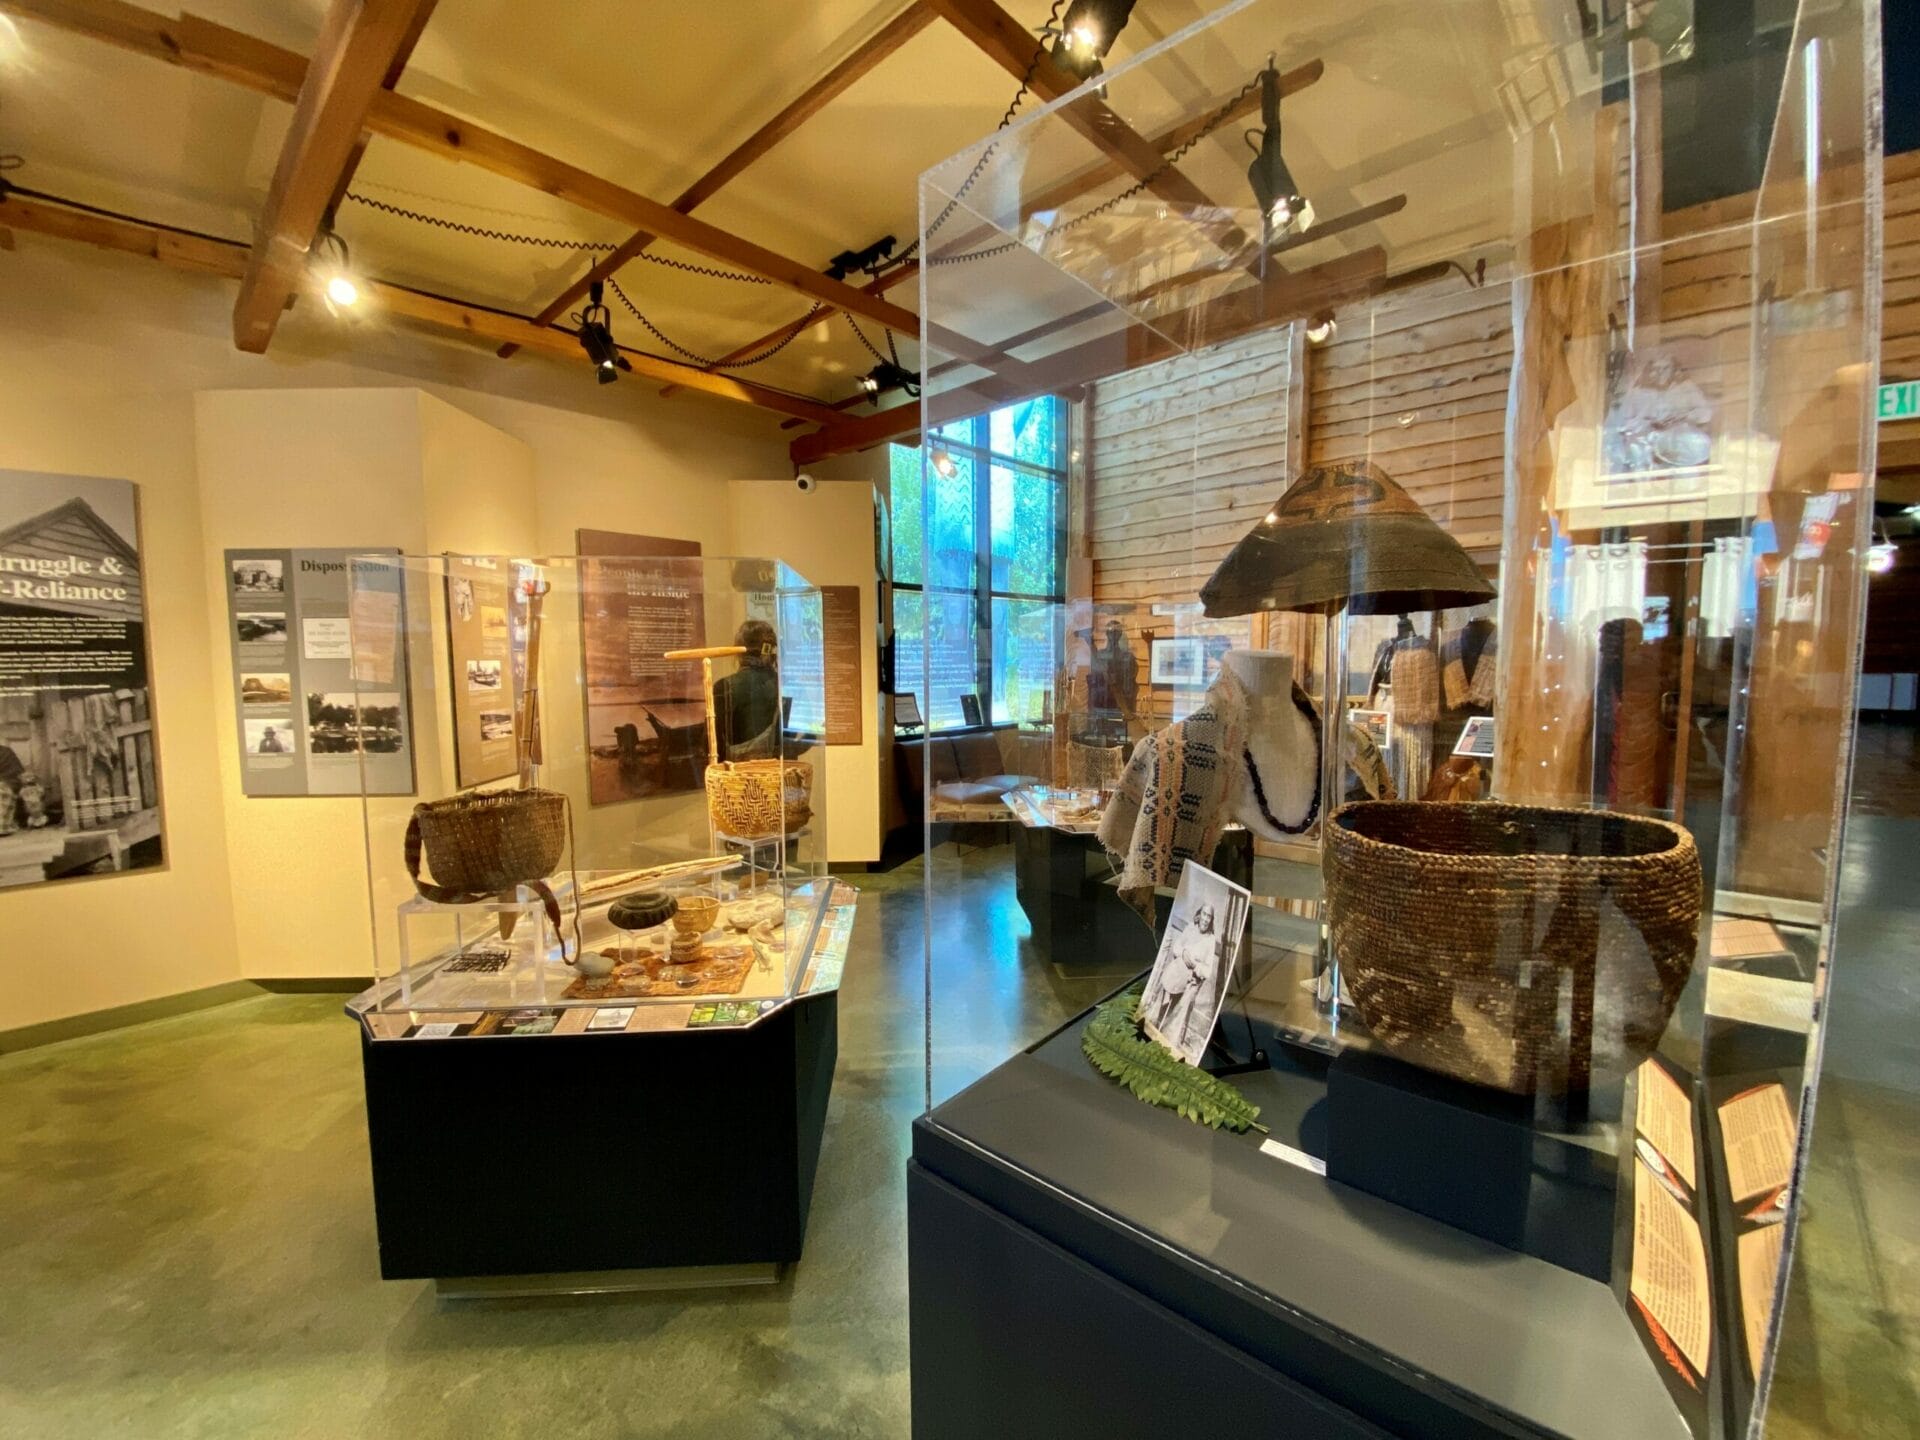 Photo of a Tribal heritage exhibit and artifacts in a museum space